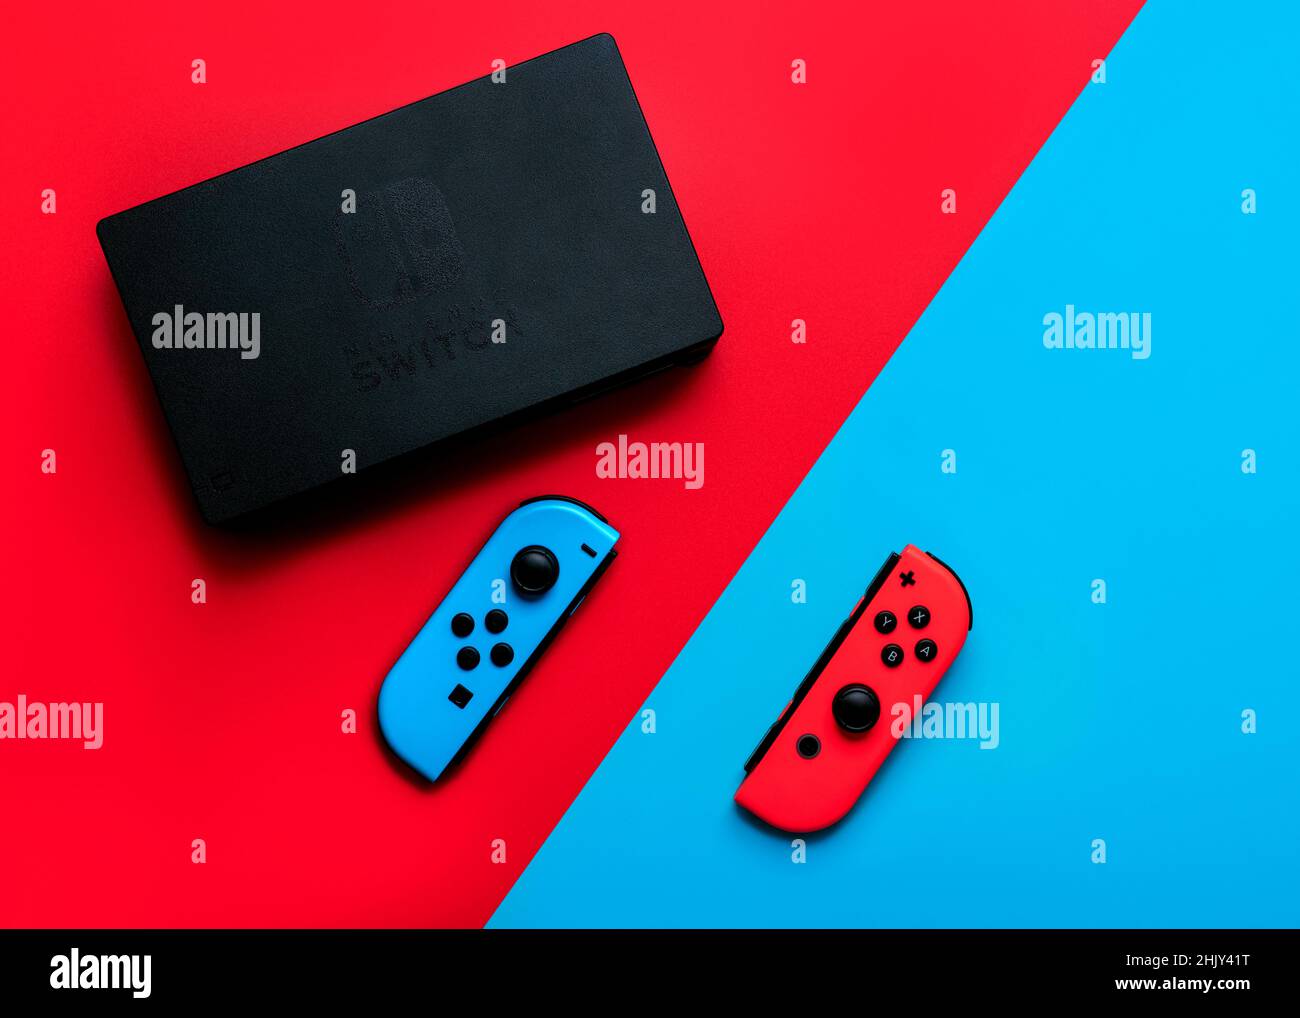 Nintendo Switch video game console with Nintendo two Joy-Cons over red and blue background Stock Photo